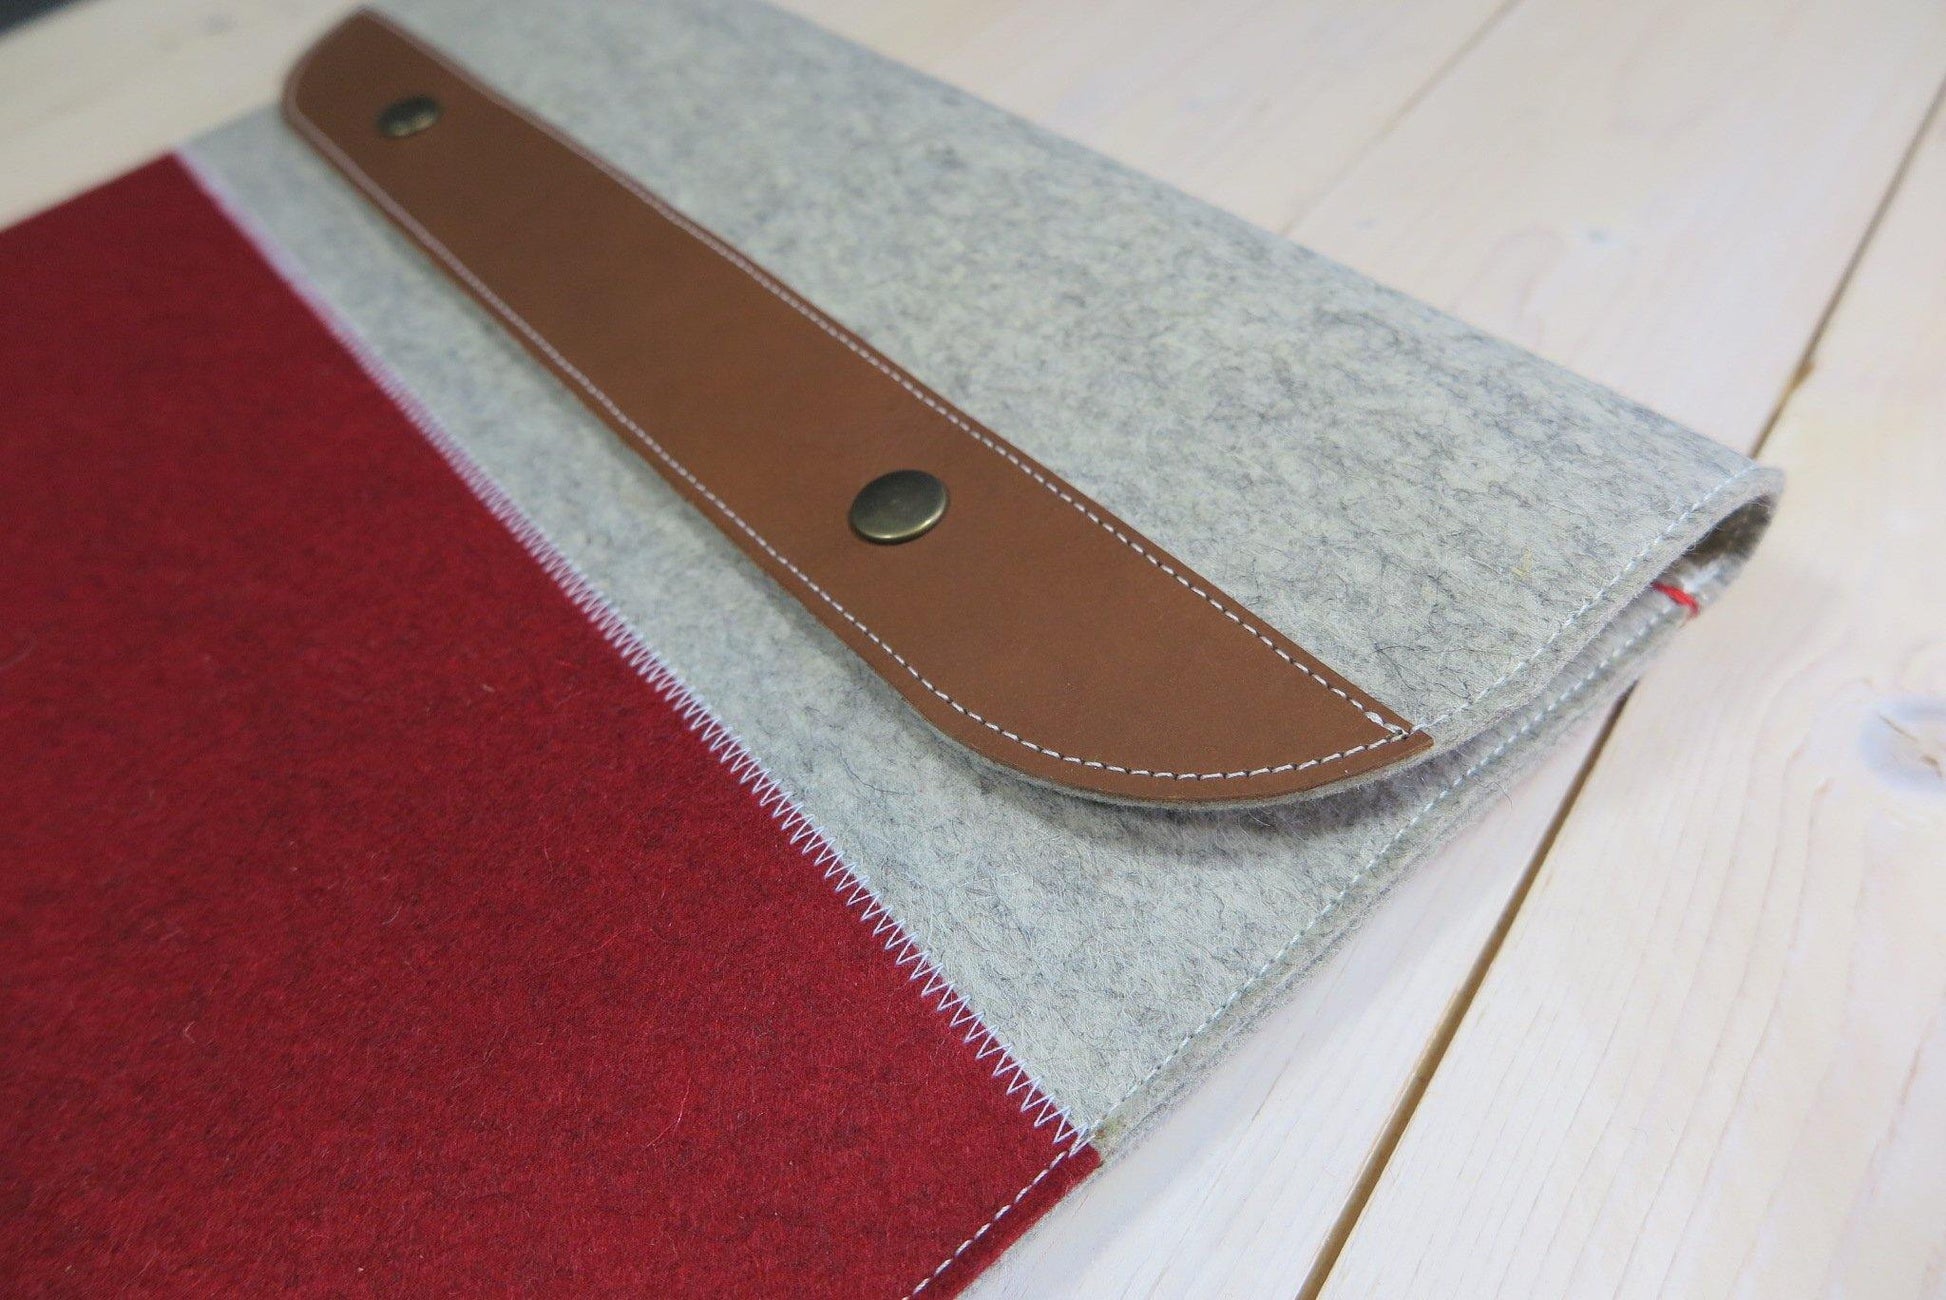 Macbook Pro 15" case in wool felt and leather with zipper